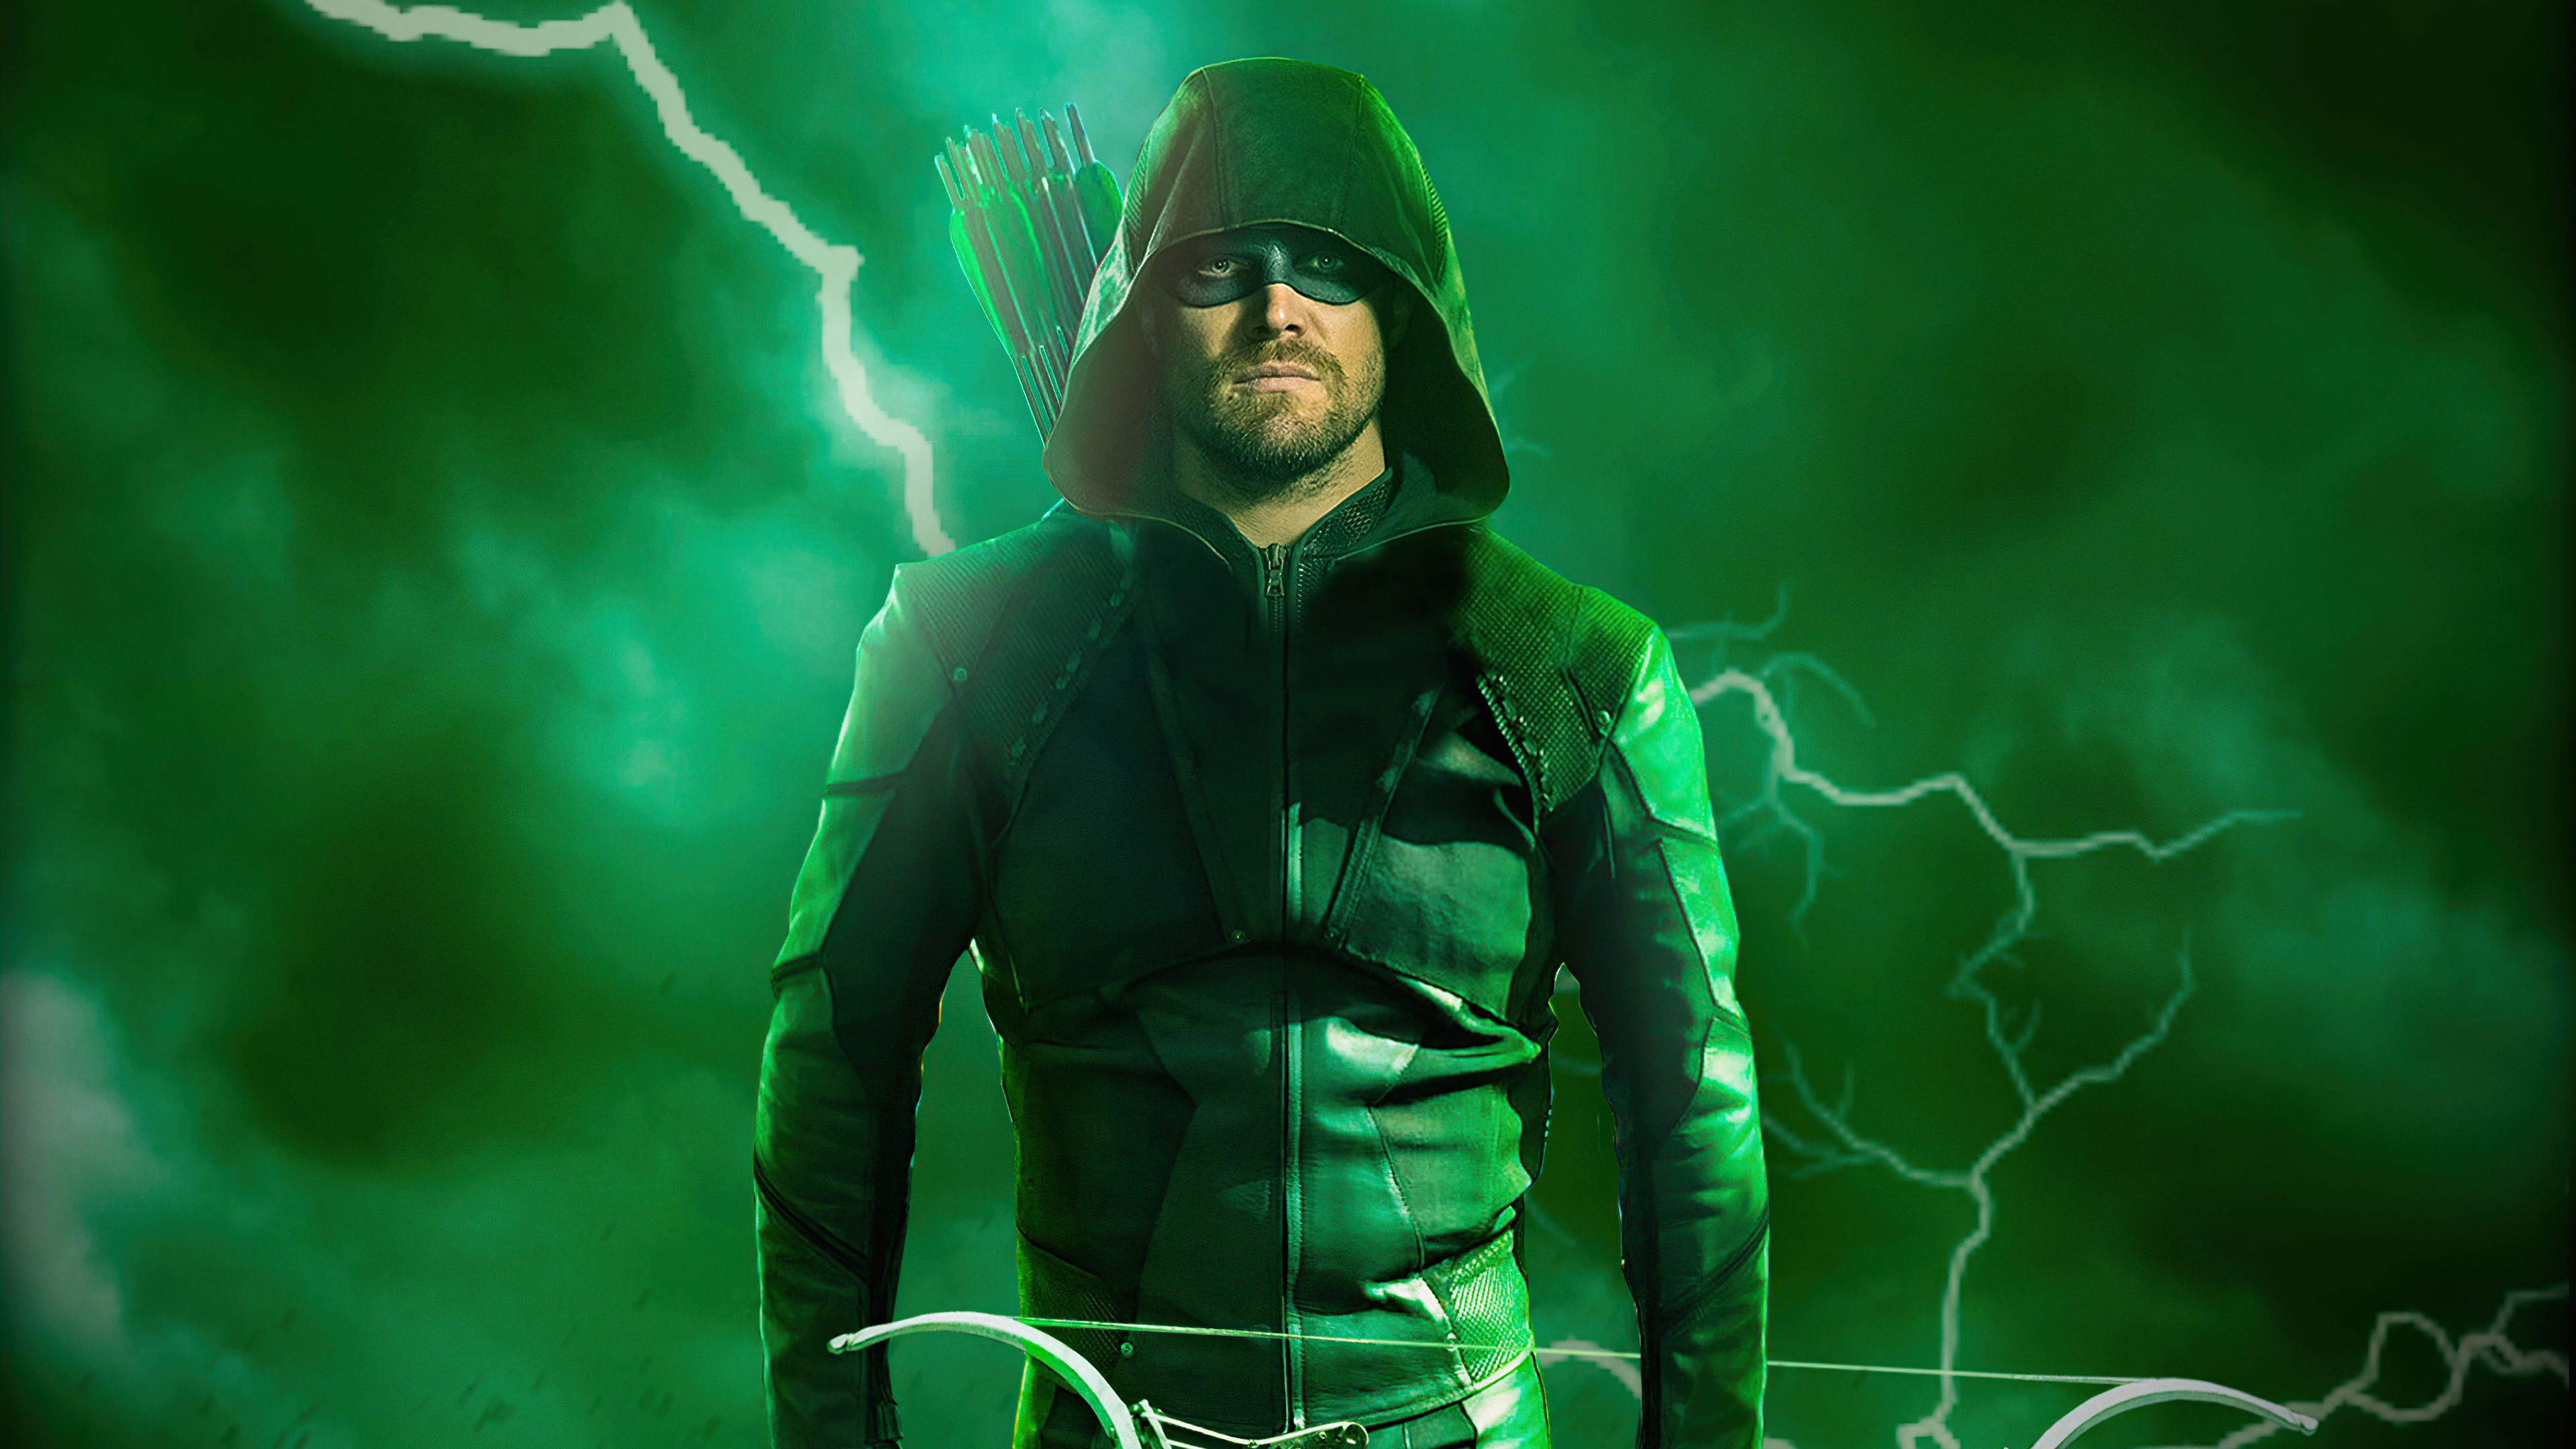 The Green Arrow 4k, HD Superheroes, 4k Wallpaper, Image, Background, Photo and Picture